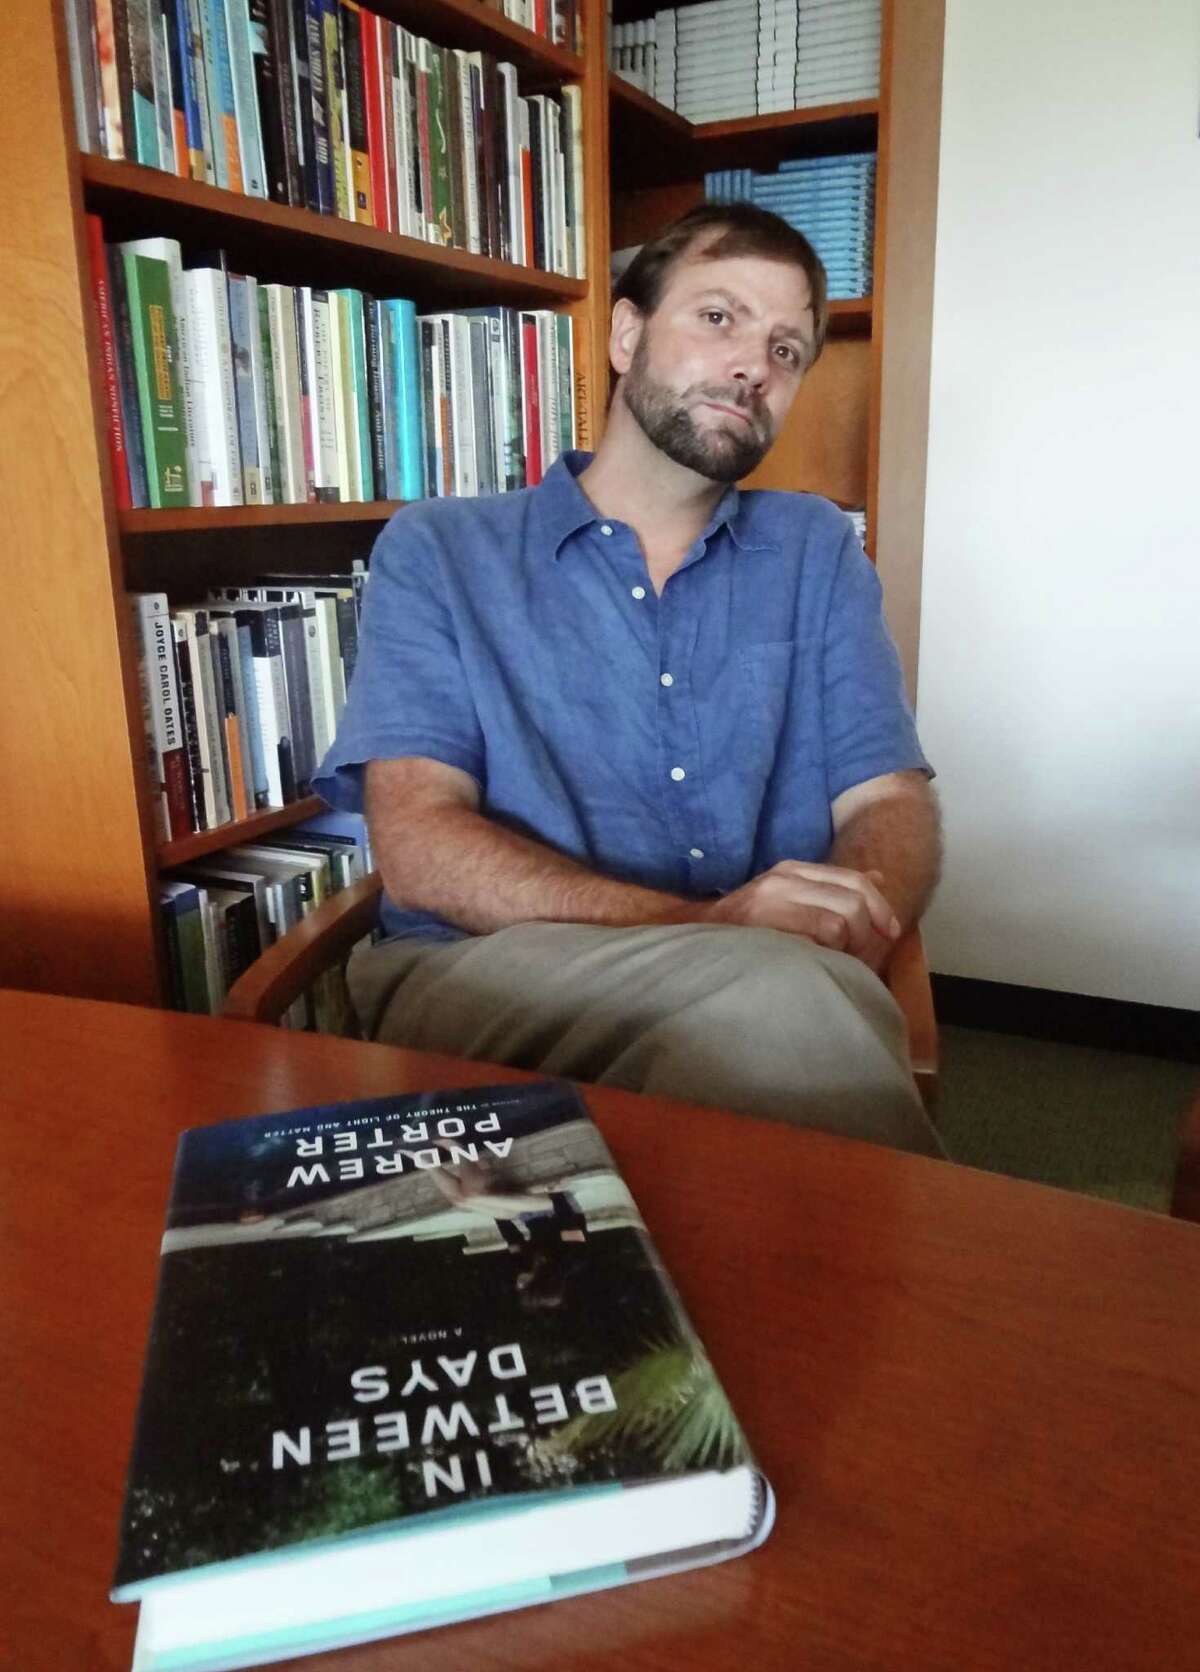 Trinity University professor Andrew Porter's novel "In Between Days" chronicles the fragmentation and reformation of a Houston family.